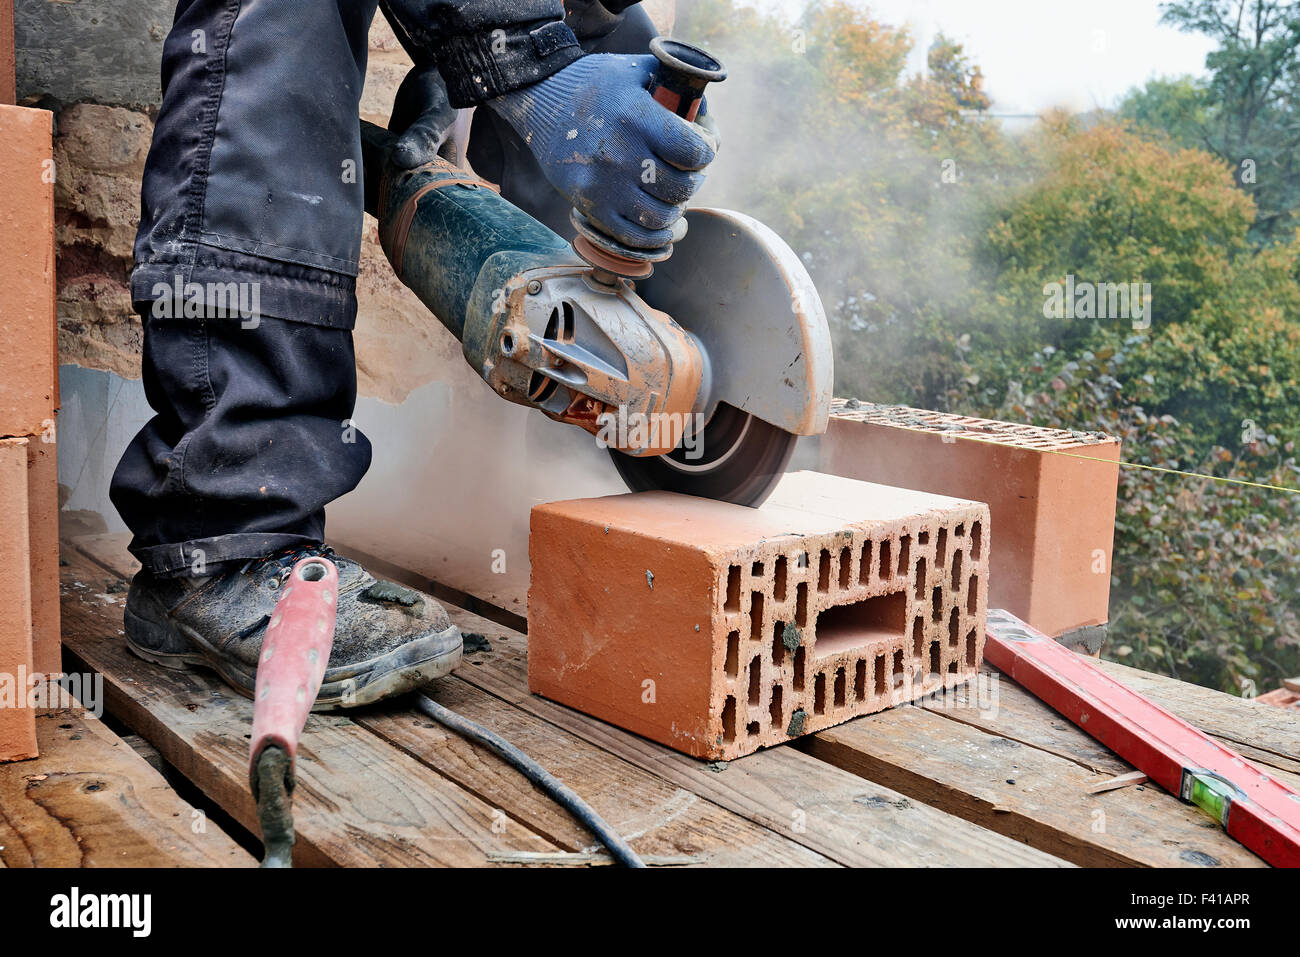 Construction worker using masonry saw to cut concrete blocks to build a